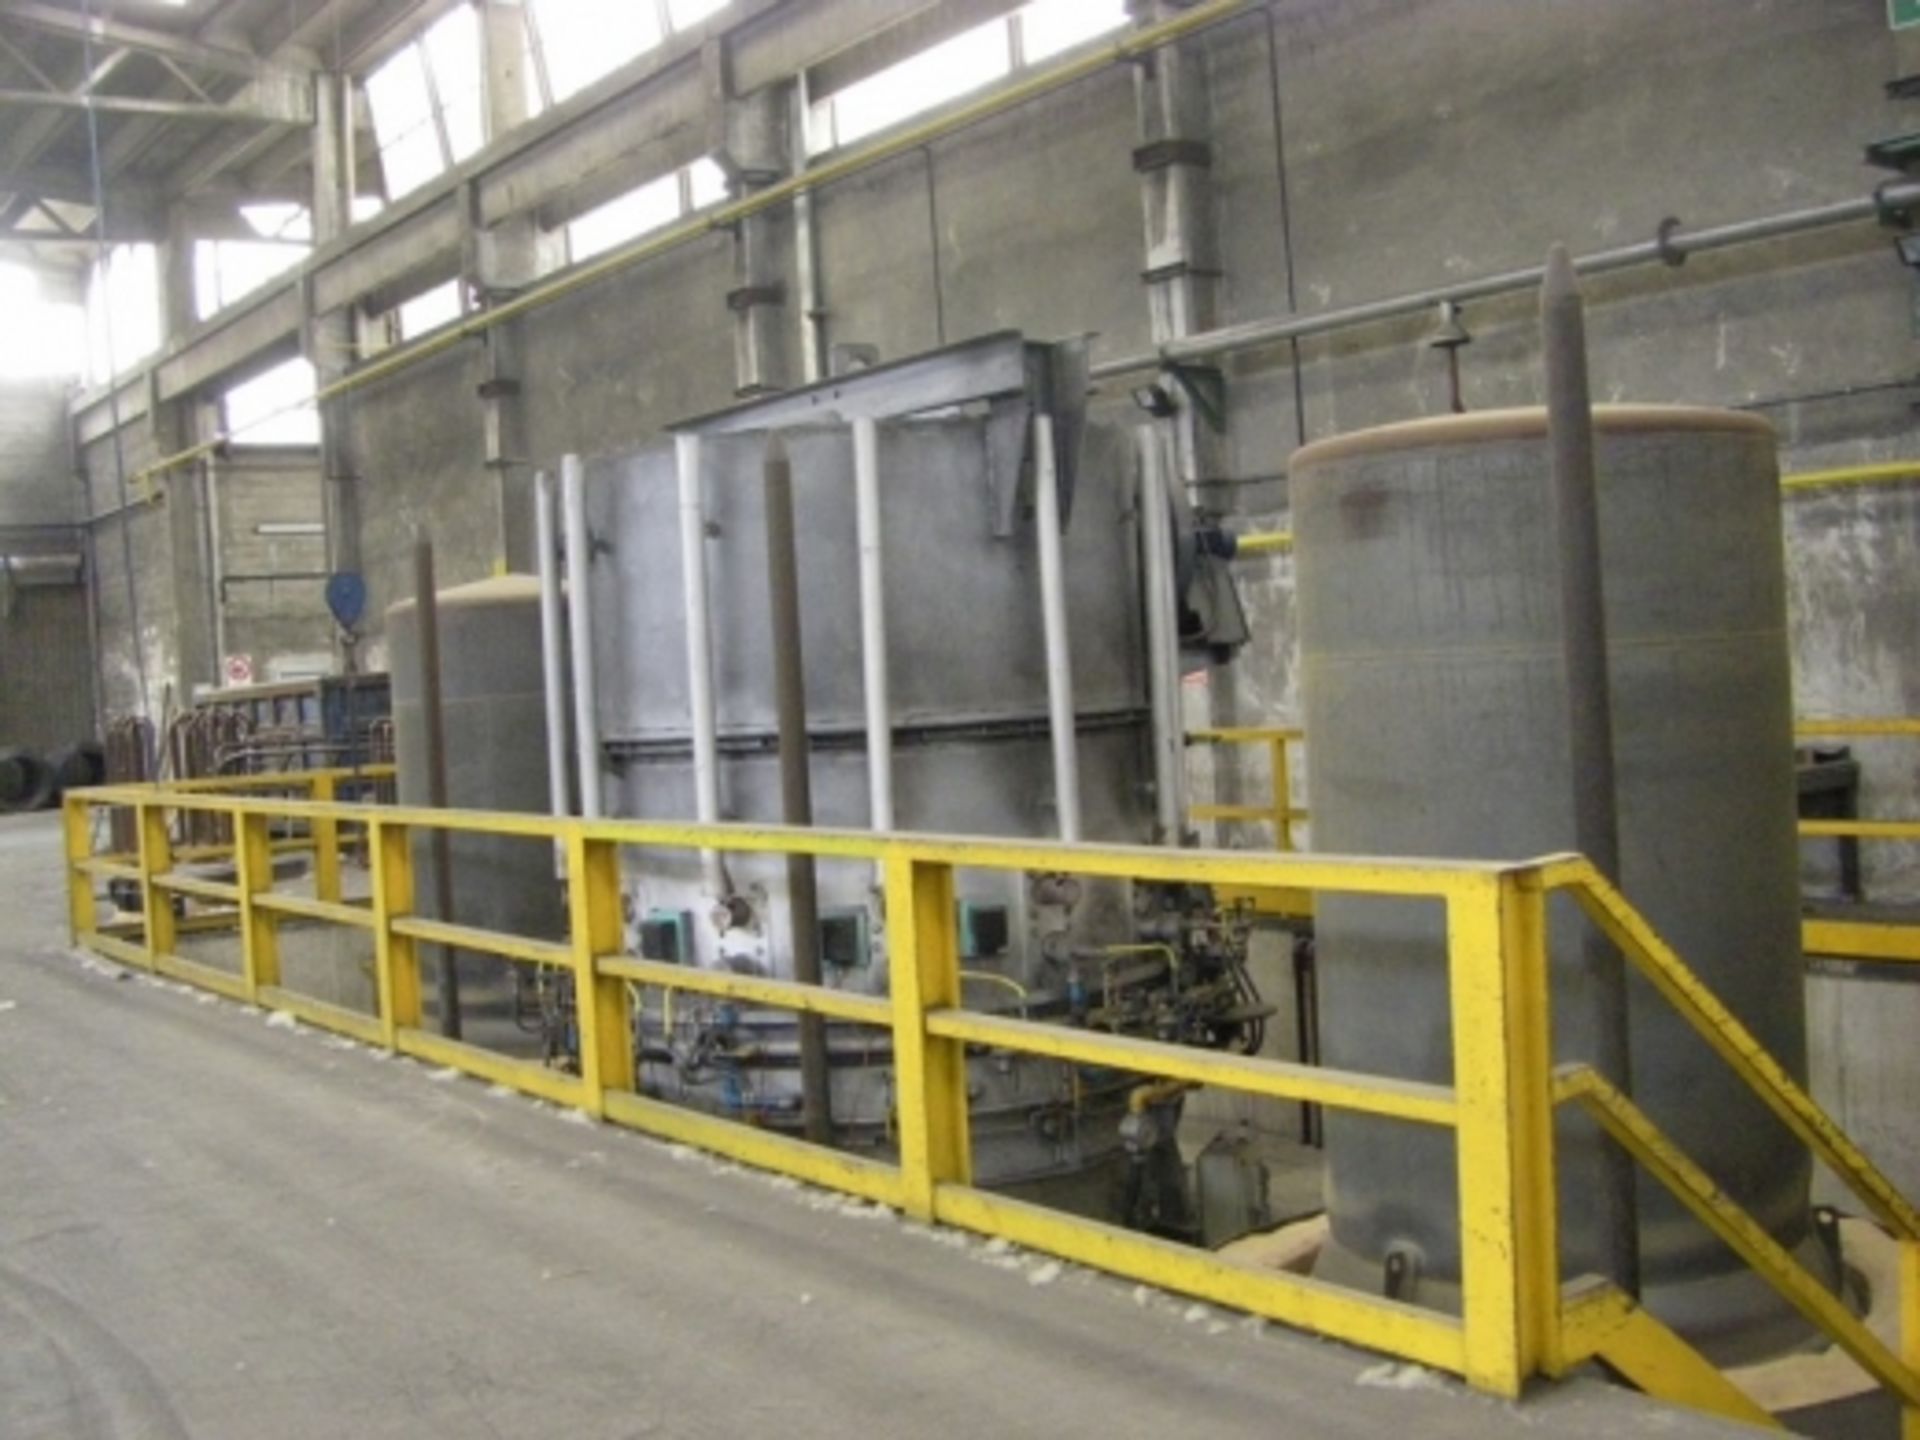 1,Hood Furnace Ing. F. FerrÃ¨ & c. with nitrogen for controlled
atmosphere annealing, 12 burners, T.